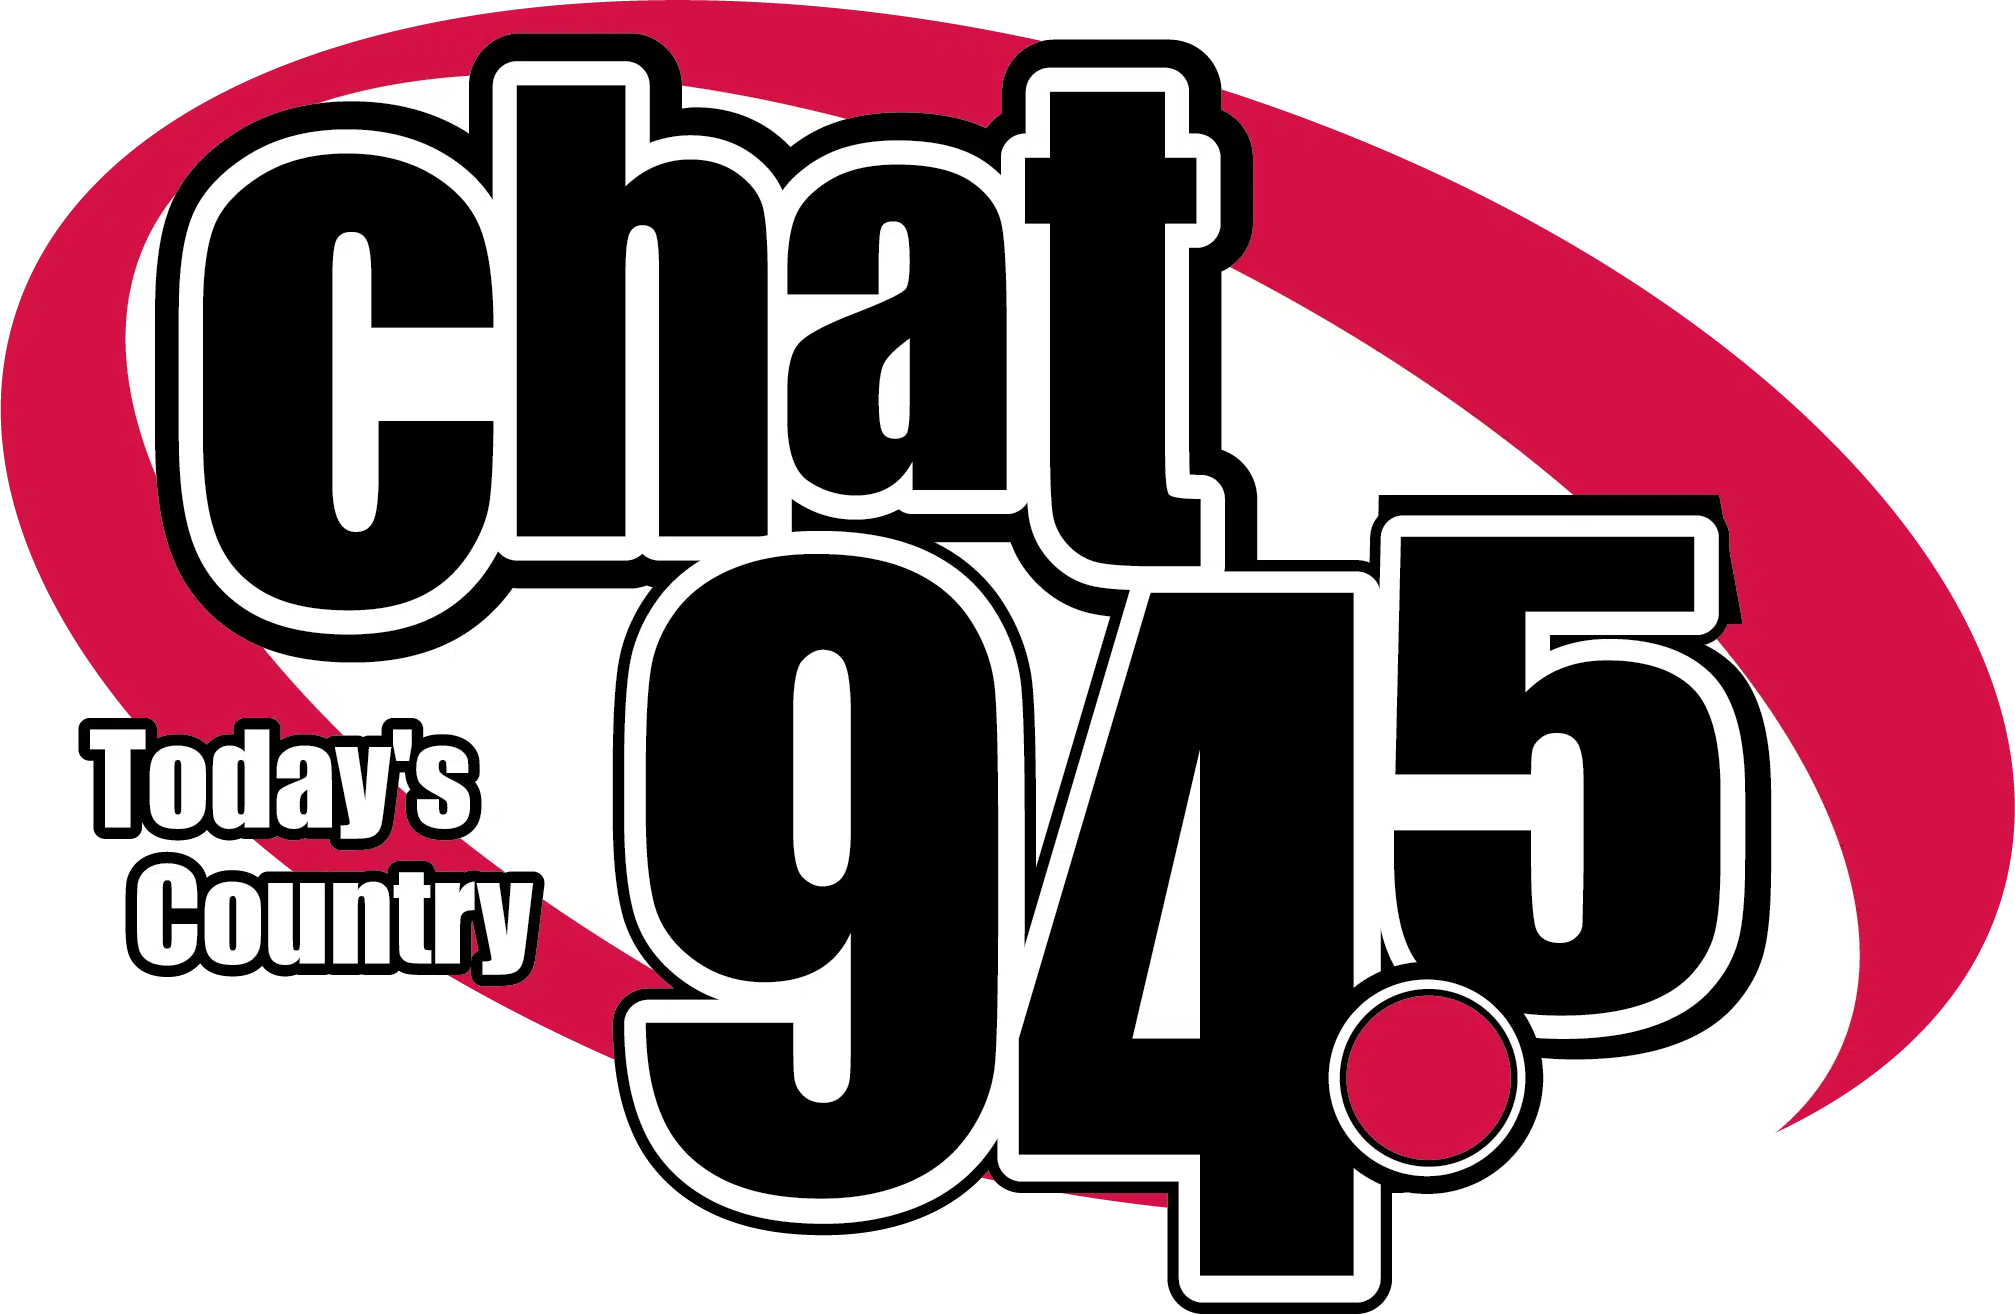 Chat 94.5